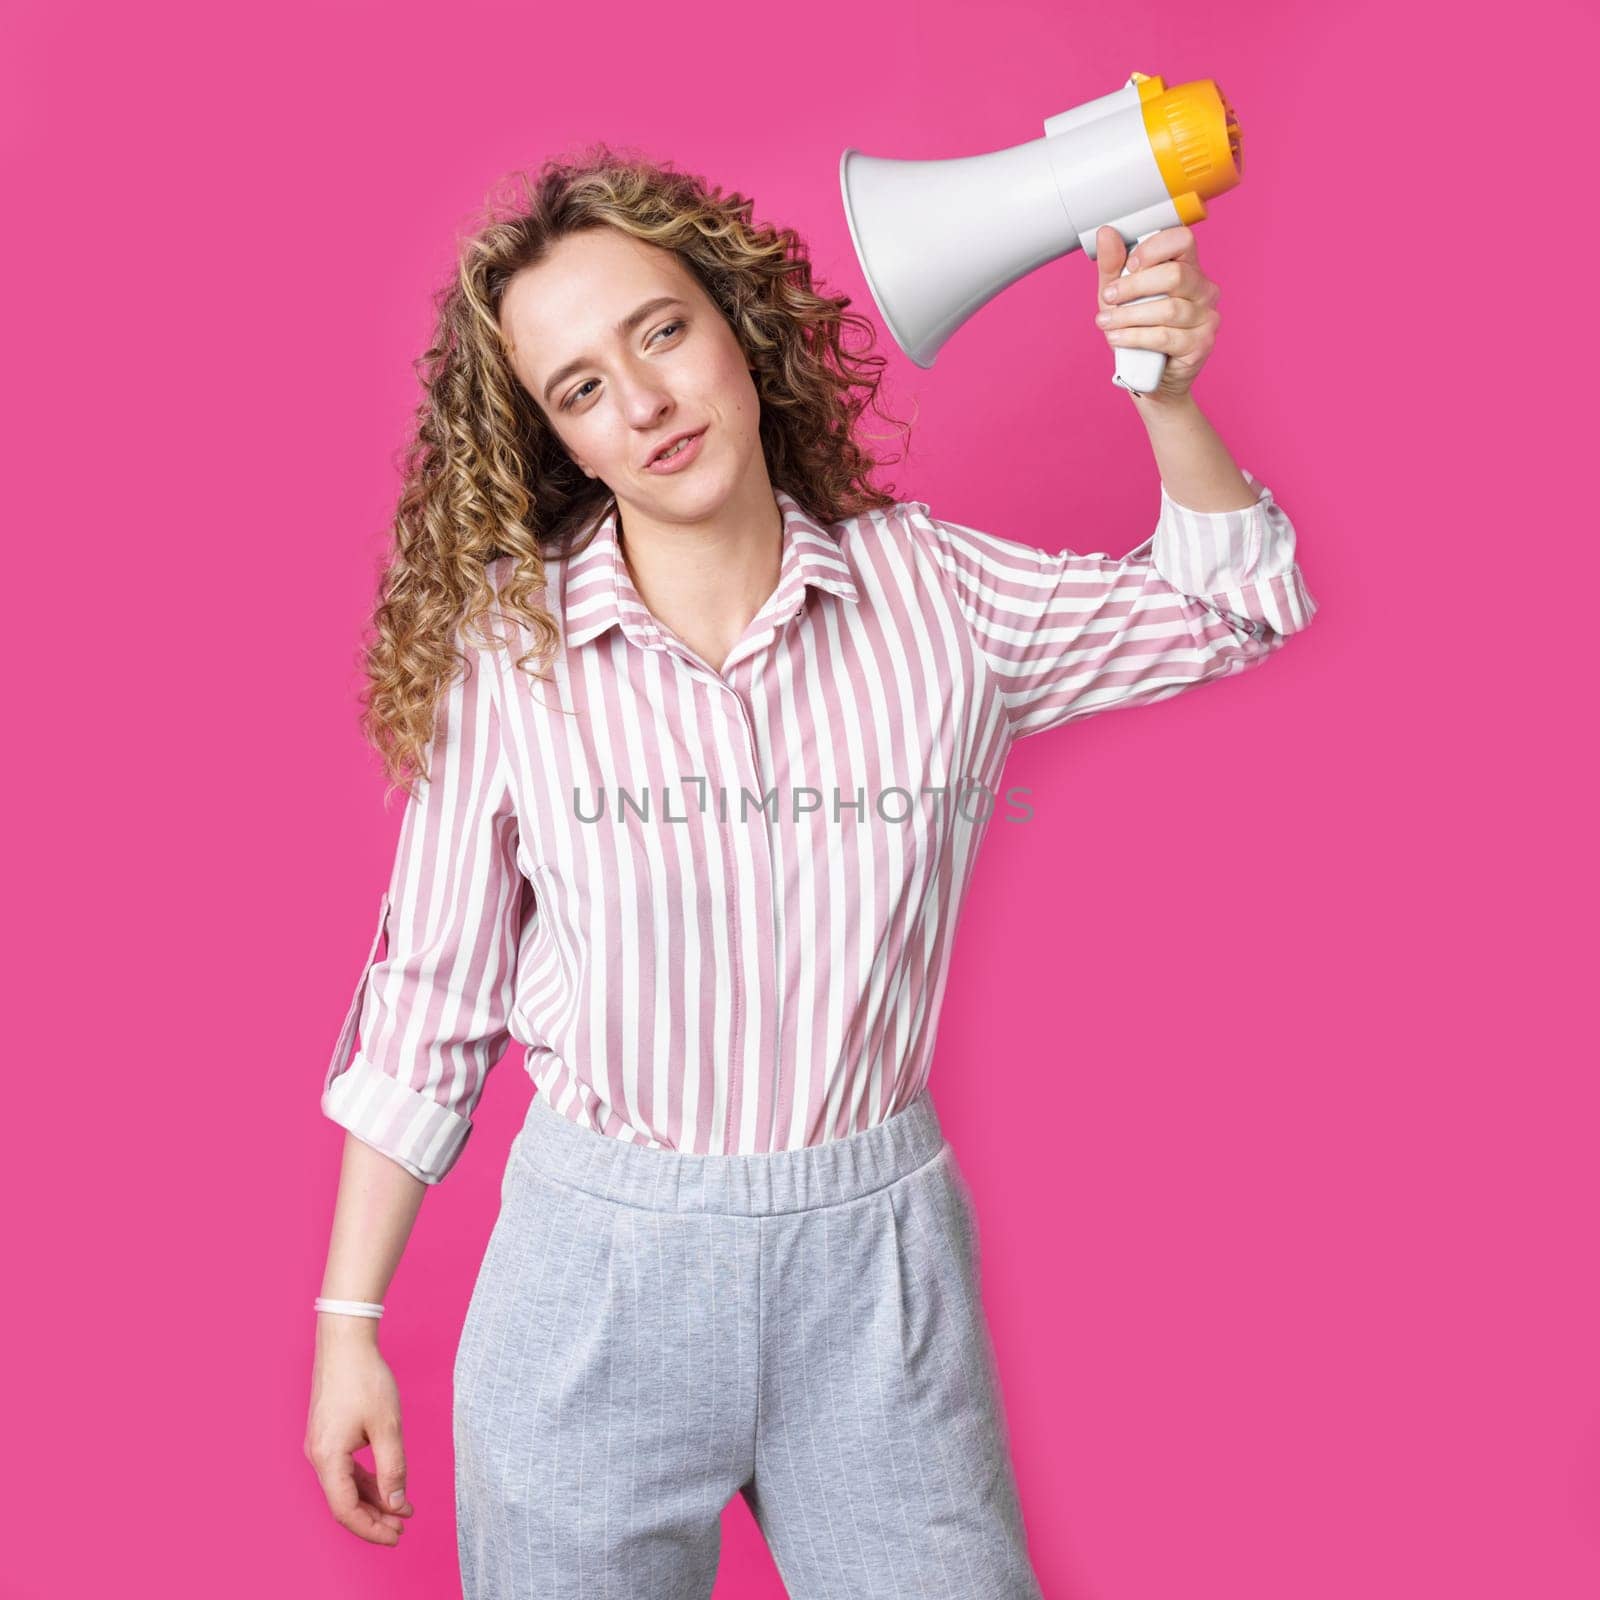 A young woman holds a screaming megaphone in her hands, which is aimed at her face. Isolated pink background. by Sd28DimoN_1976